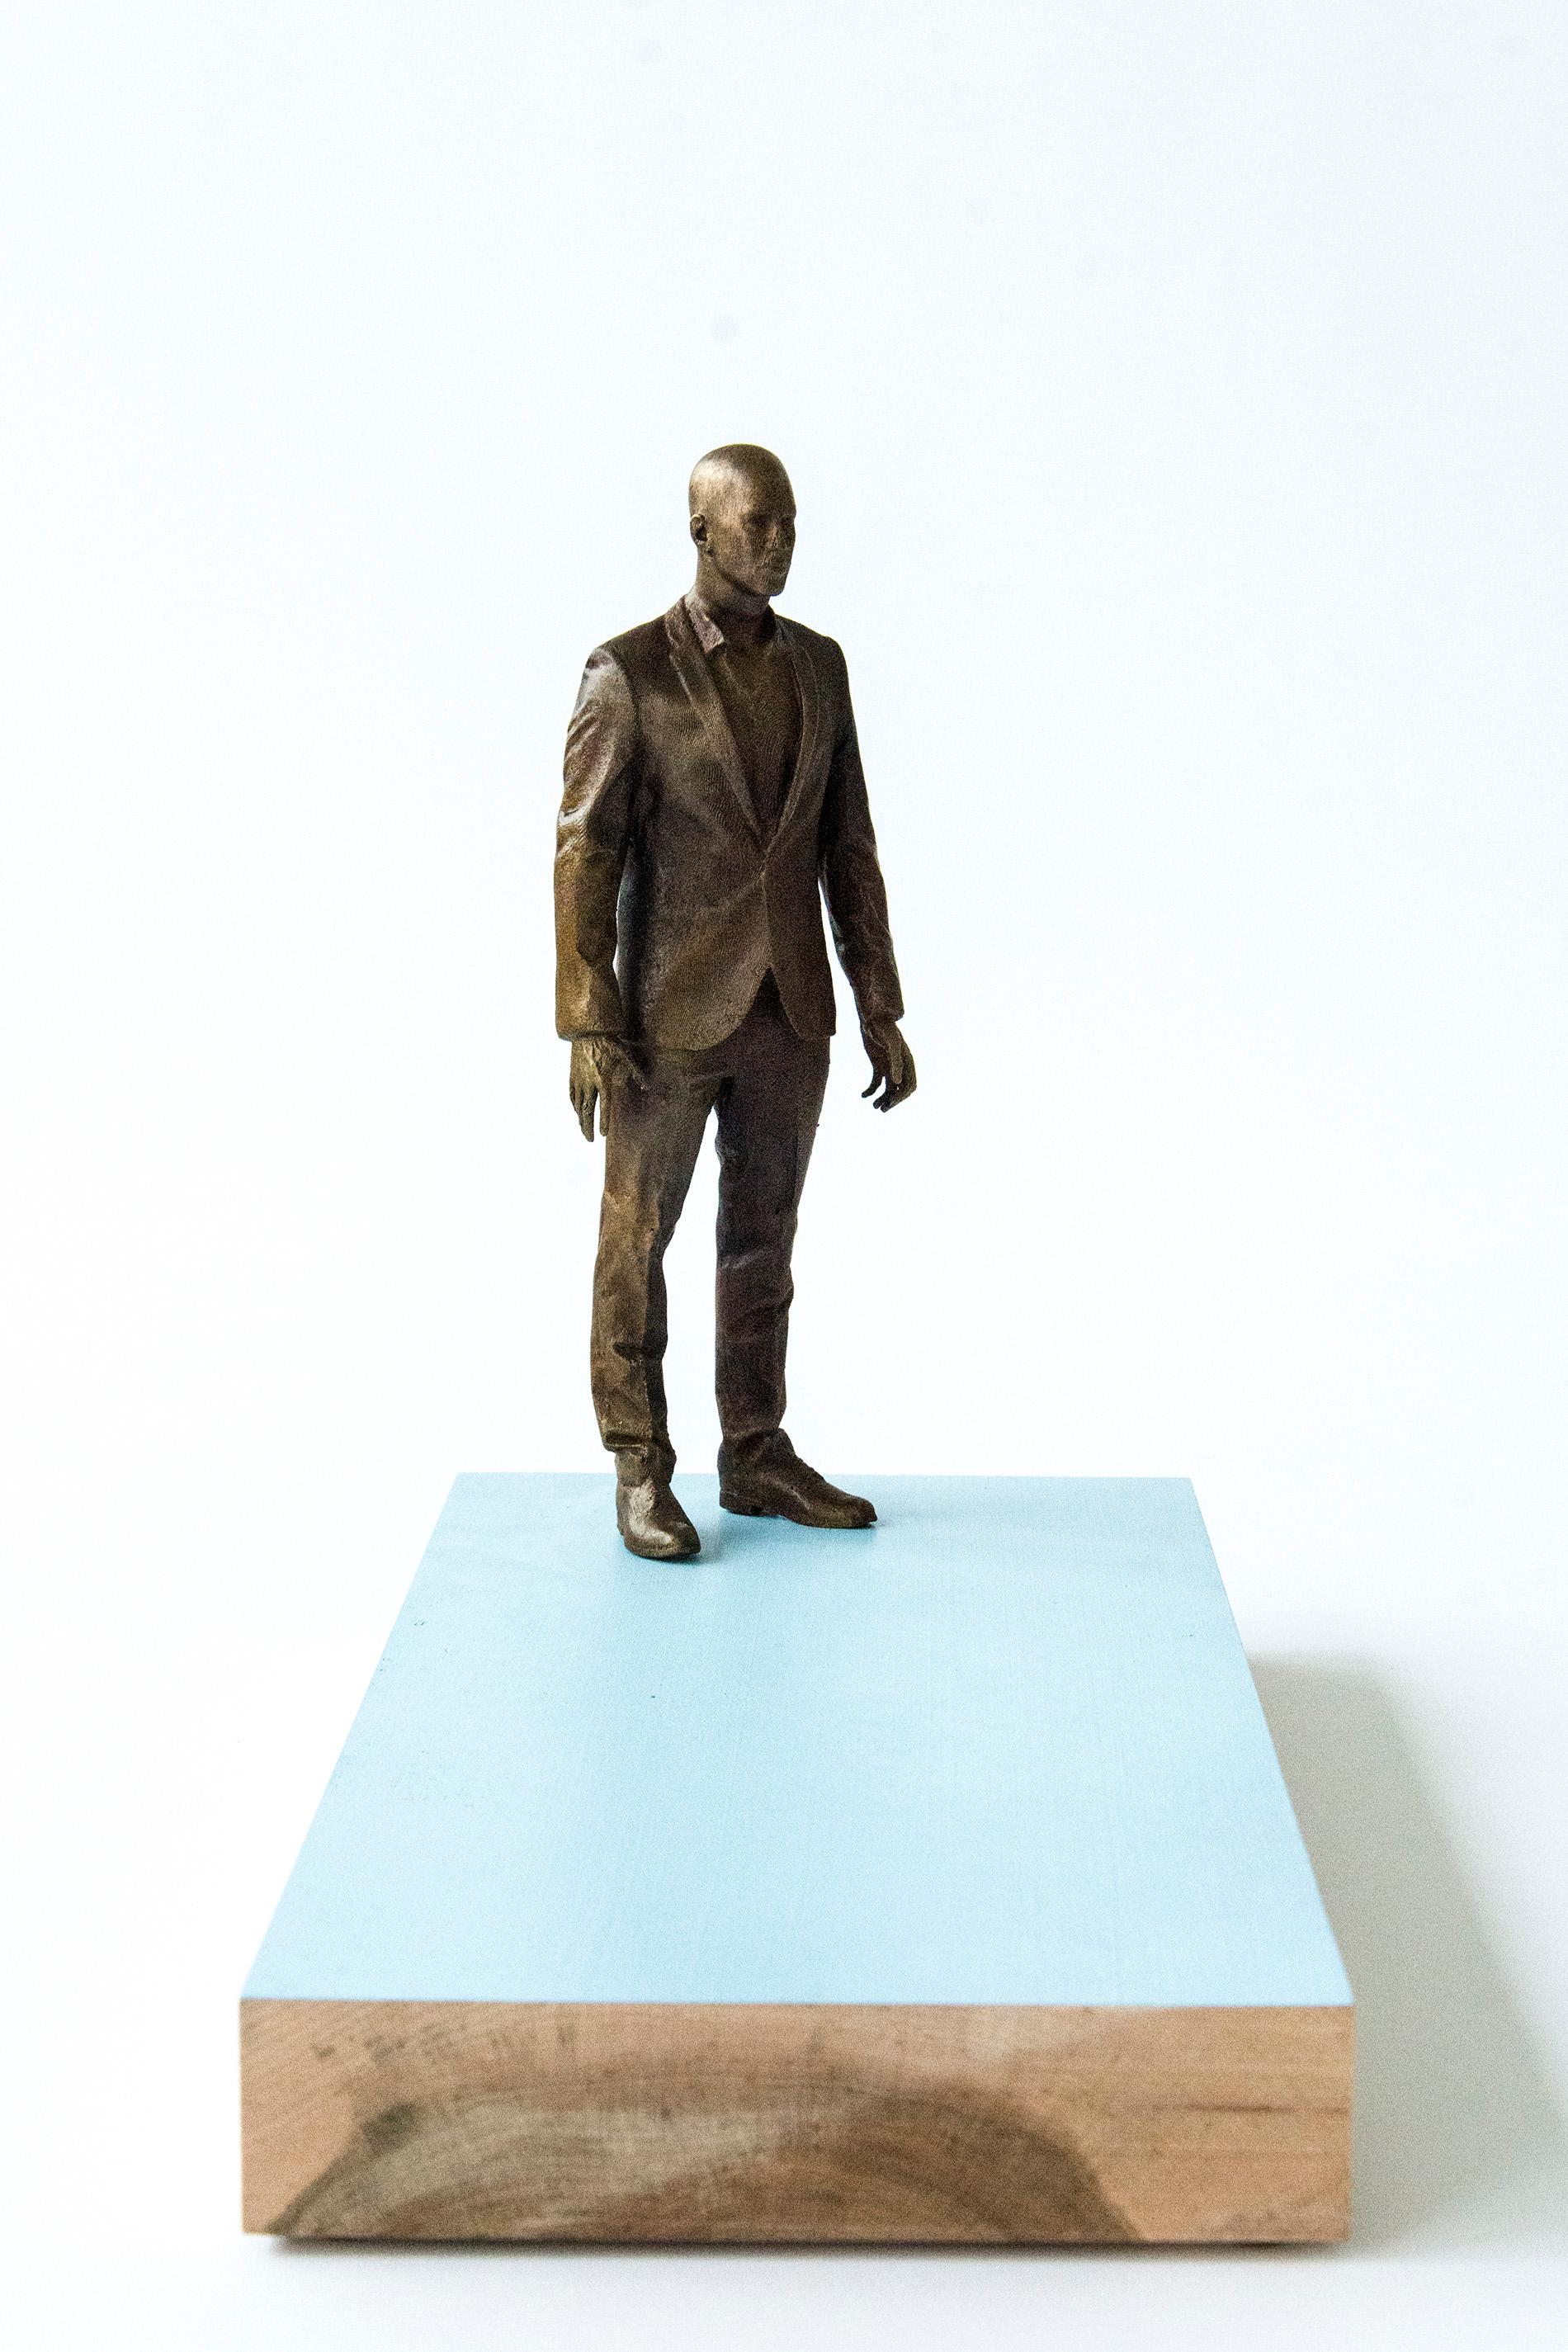 Ponder - small, narrative, figurative, male bronze sculpture on wood base - Contemporary Sculpture by Roch Smith